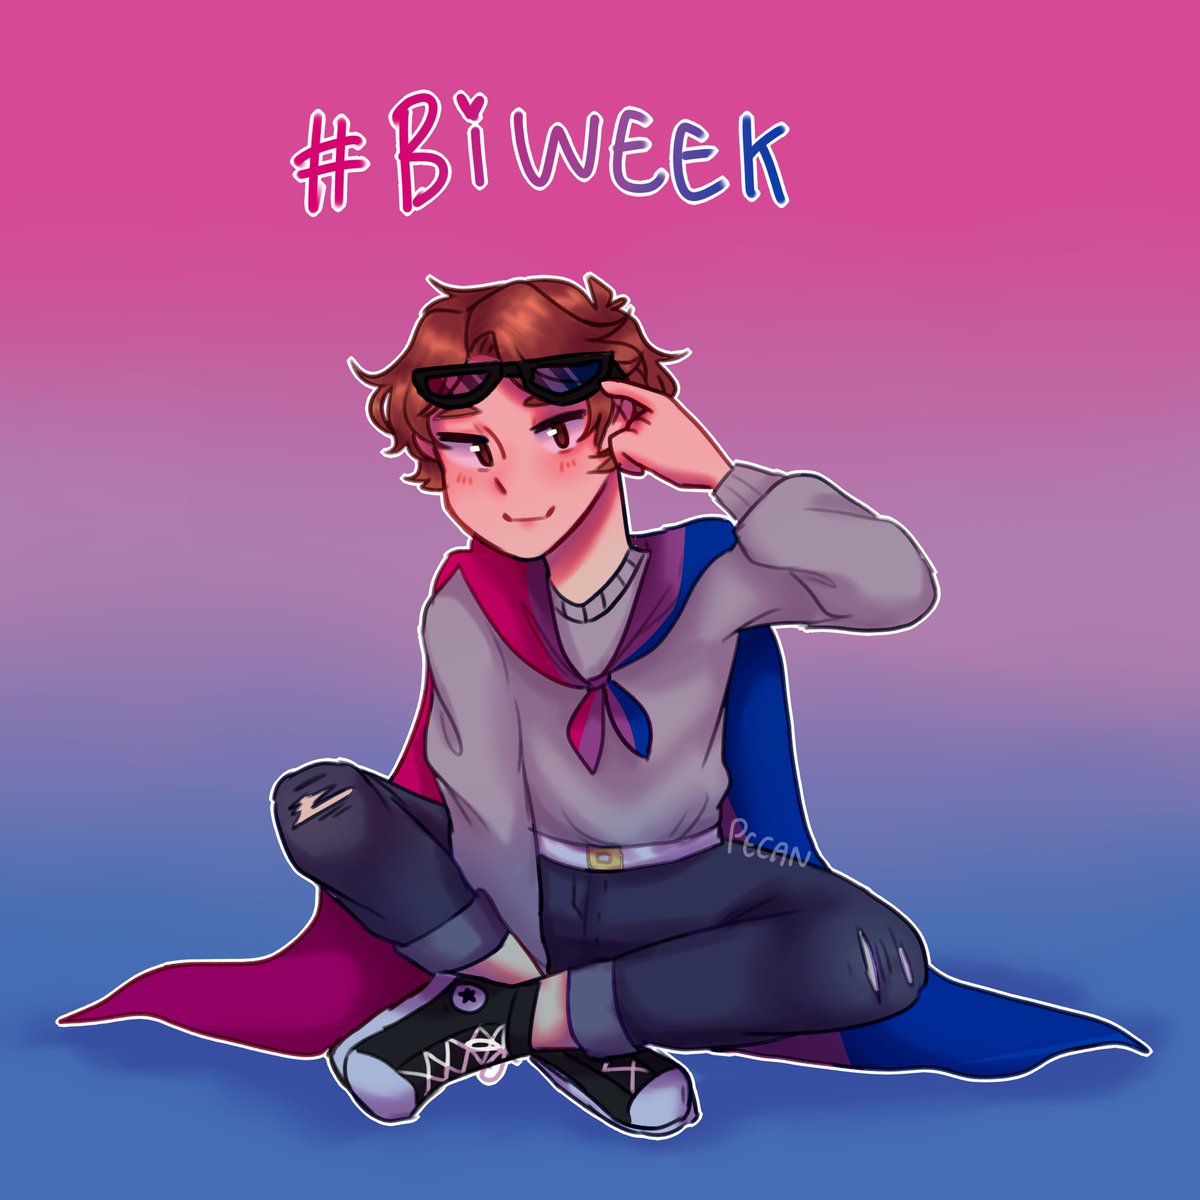 so i drew @The_Eret  but he's wearing a tucked in sweater (weather) and cuffed jeans 😳👉👈
also, happy #BiAwarenessWeek ^^
#BiWeek #eretfanart